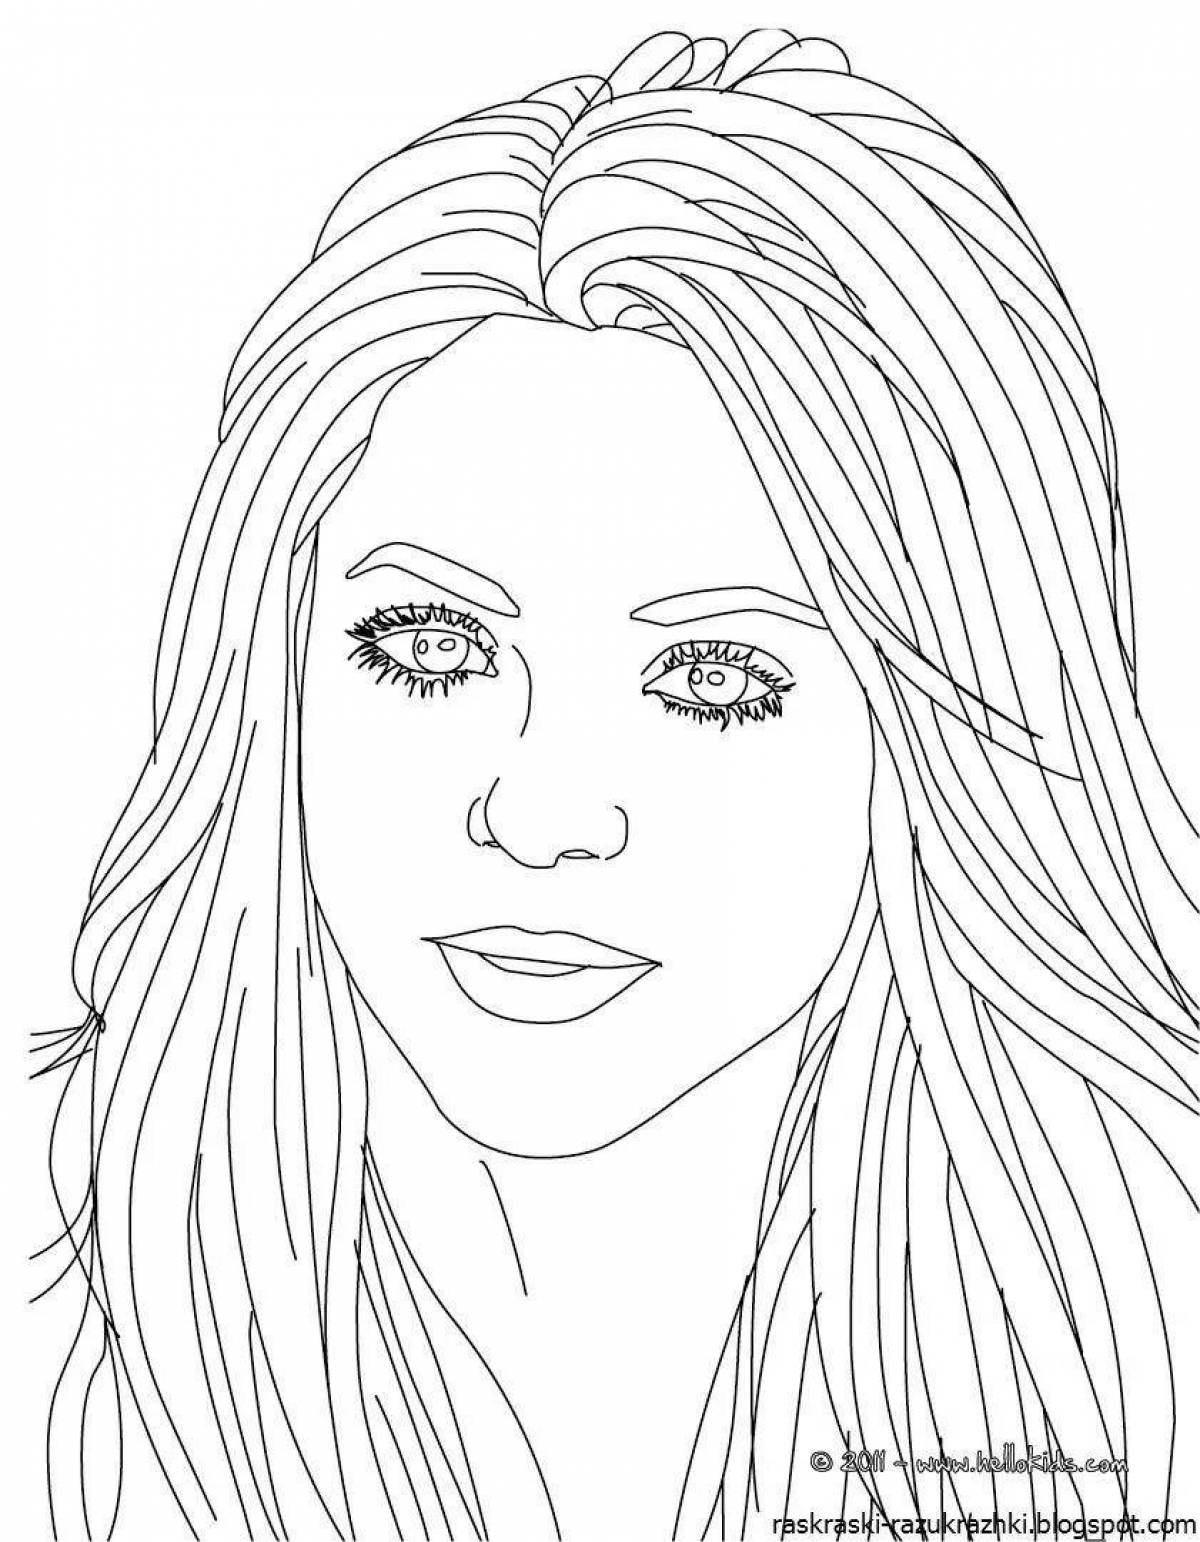 Coloring book portrait of a girl